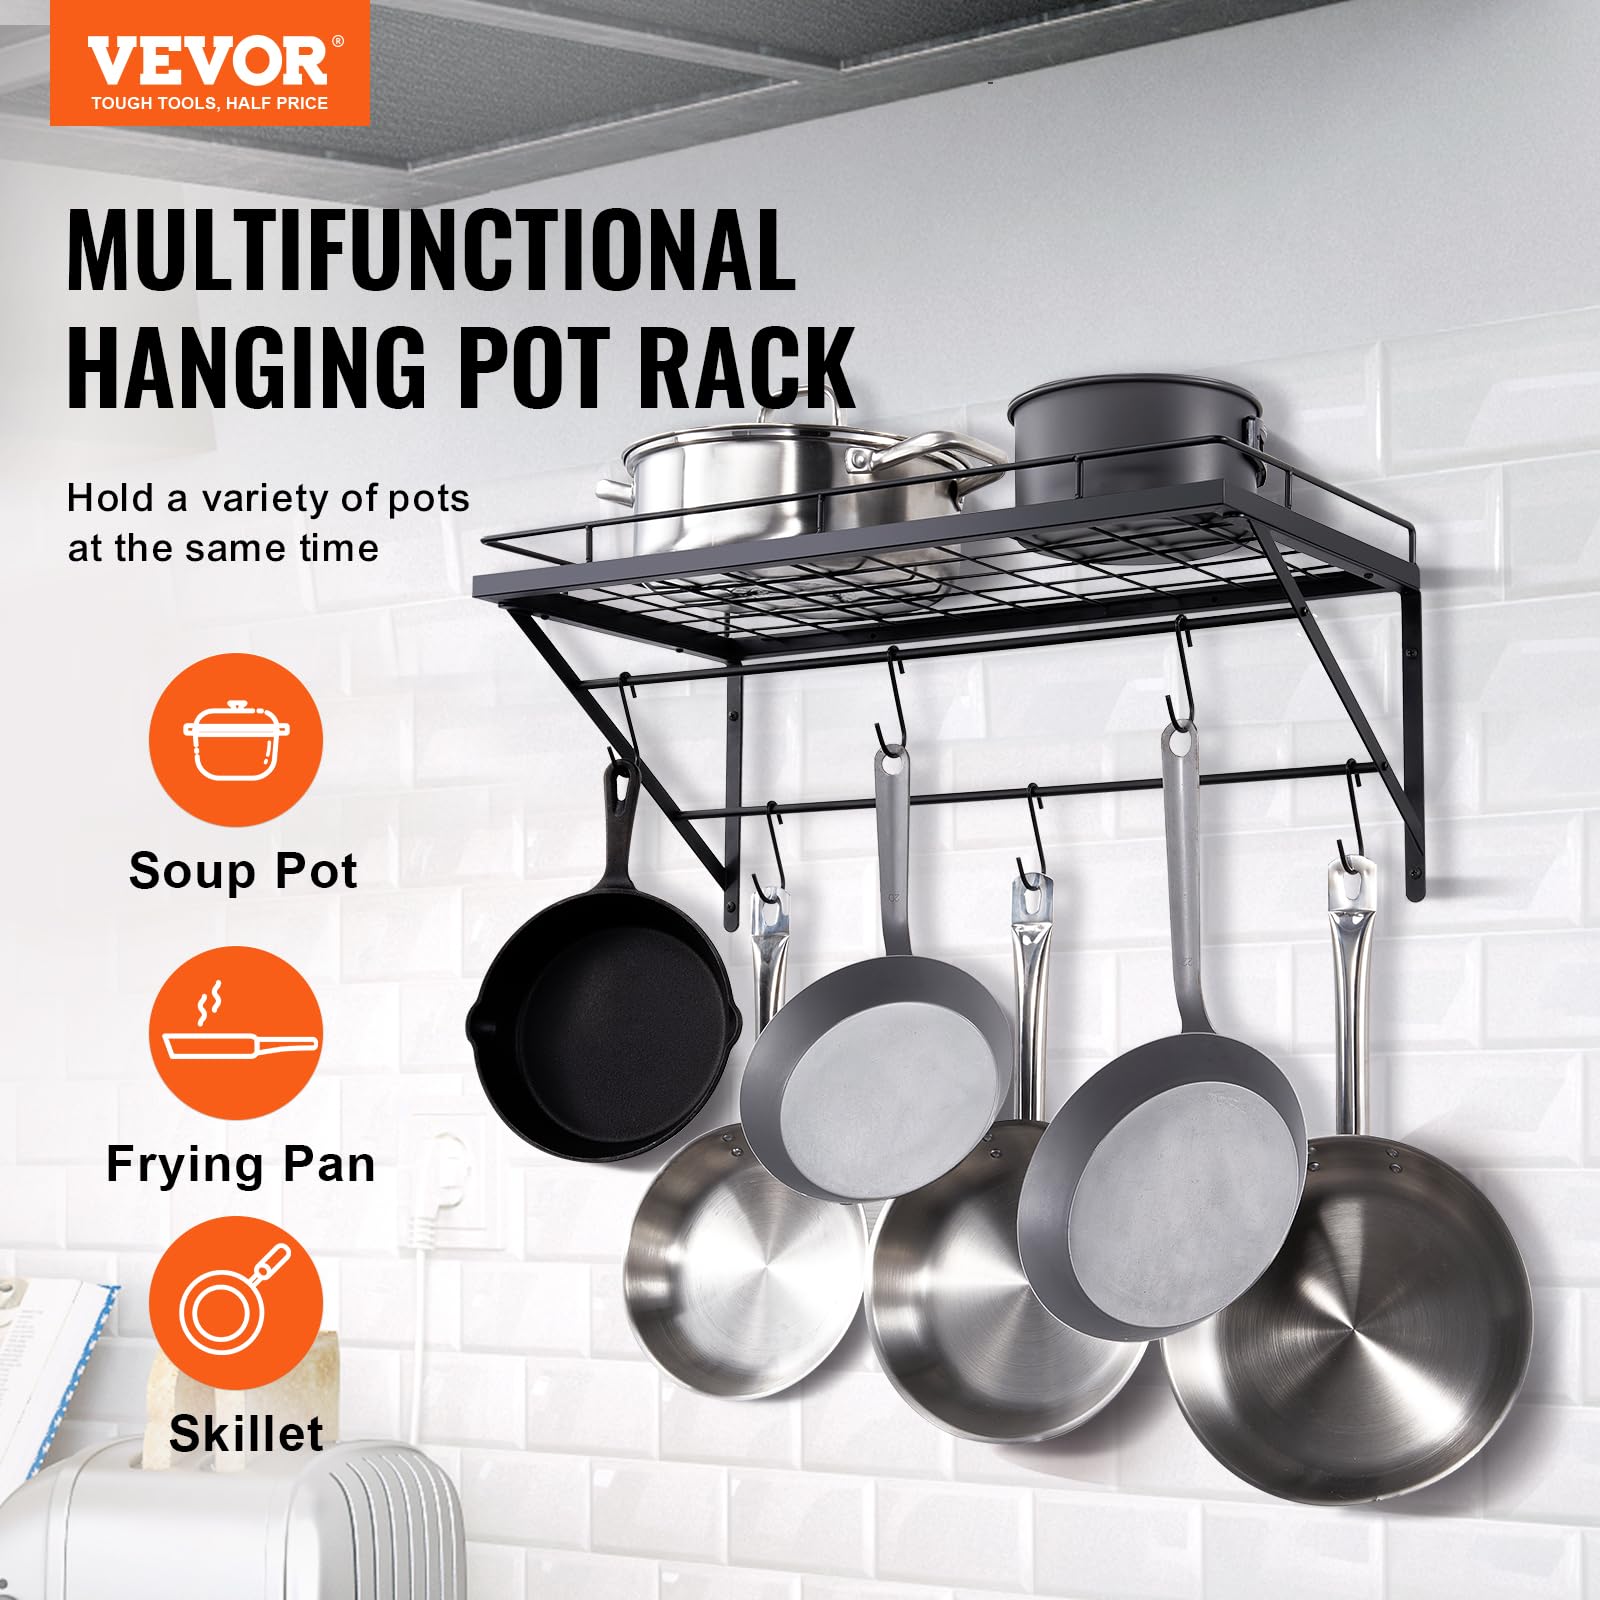 VEVOR Pot Rack Wall Mounted, 24 inch Pot and Pan Hanging Rack, Pot and Pan Hanger with 12 S Hooks, 55 lbs Loading Weight, Ideal for Pans, Utensils, Cookware in Kitchen